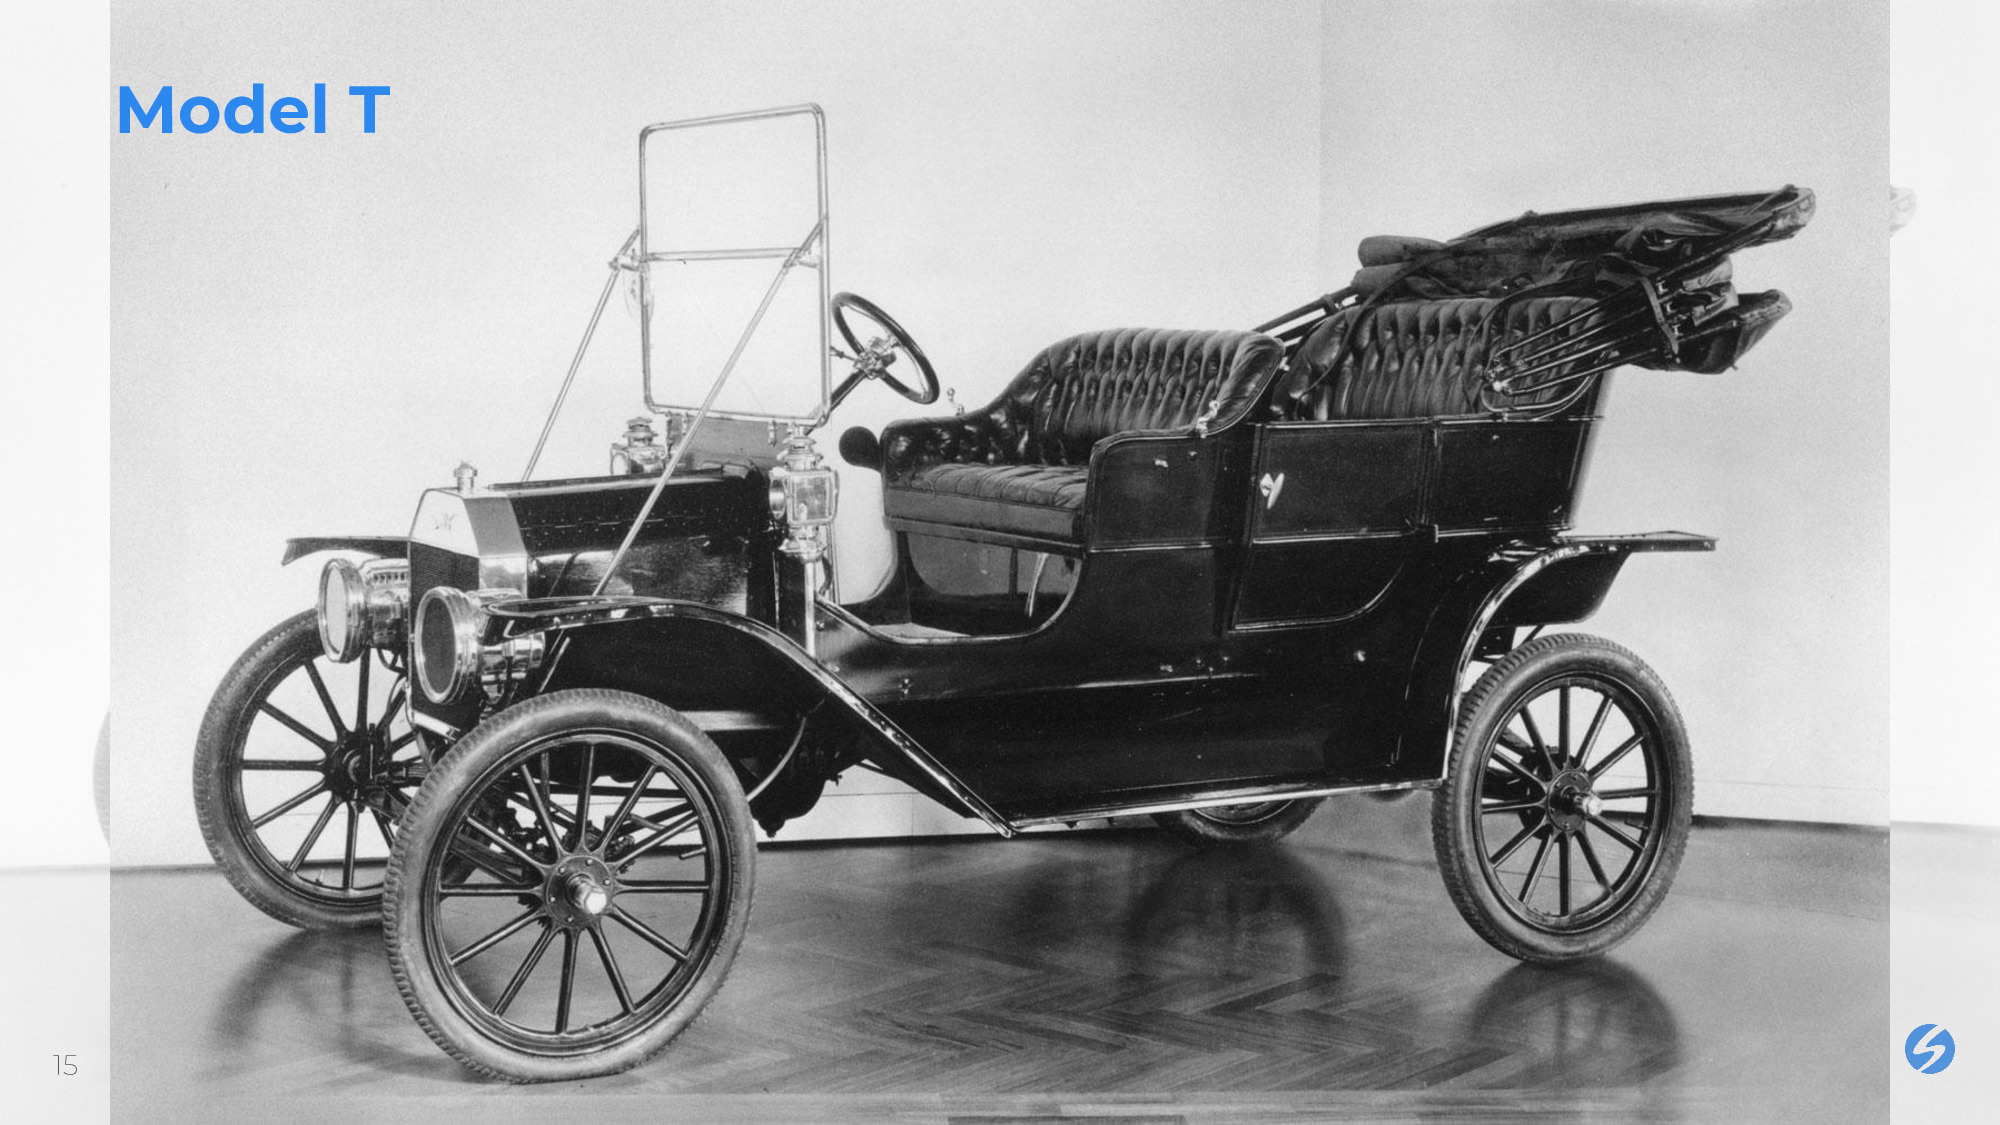 Model T by Ford